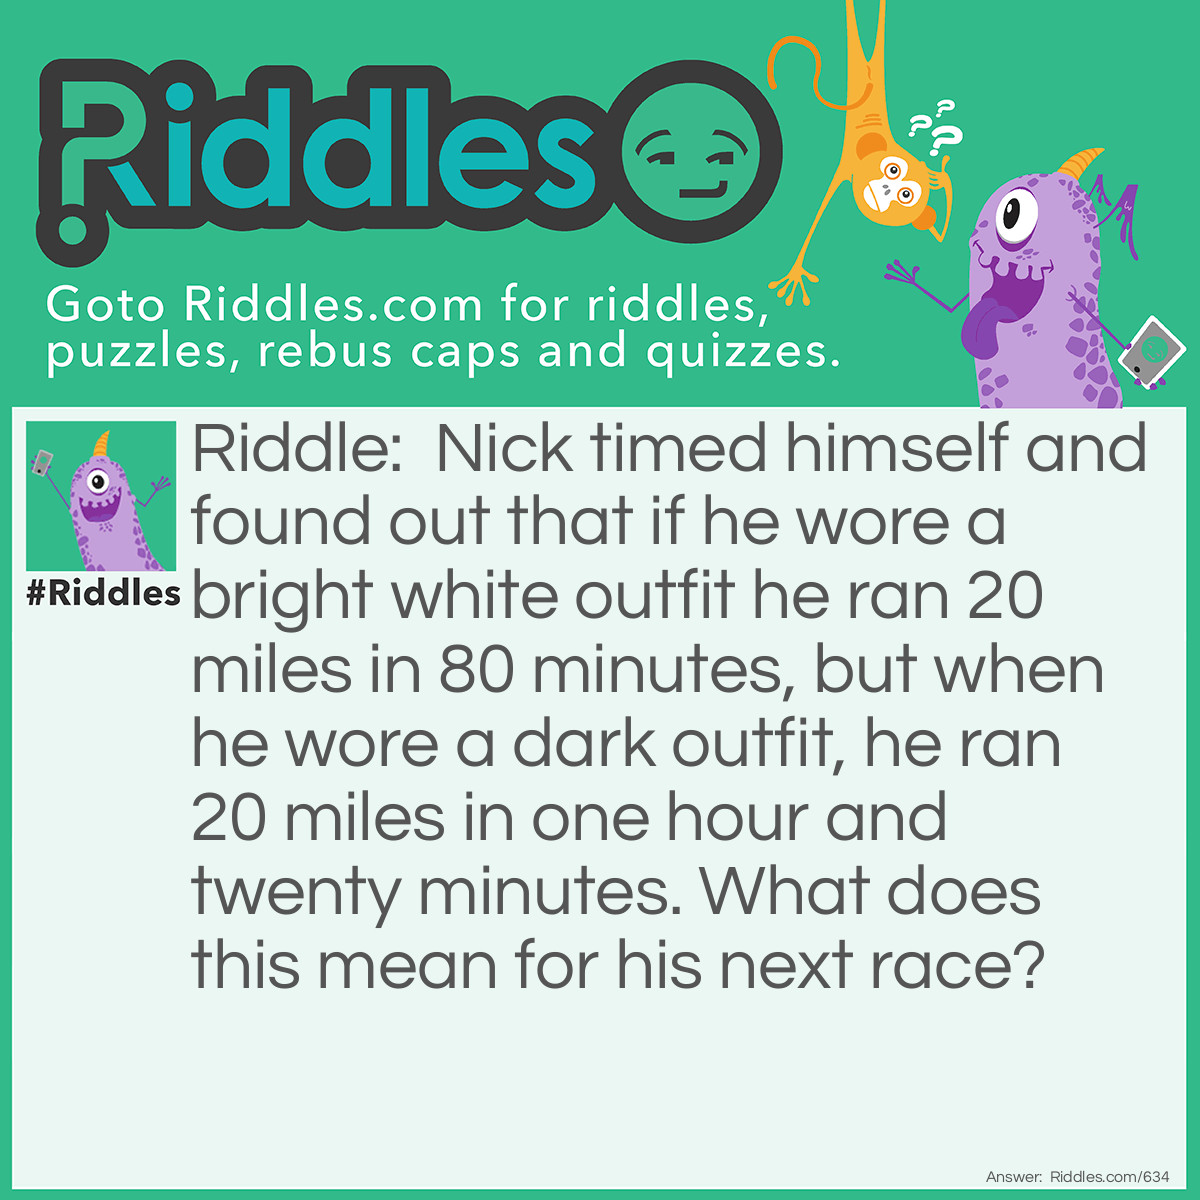 Riddle: Nick timed himself and found out that if he wore a bright white outfit he ran 20 miles in 80 minutes, but when he wore a dark outfit, he ran 20 miles in one hour and twenty minutes. What does this mean for his next race? Answer: Nothing, as 80 minutes equals an hour and twenty minutes.